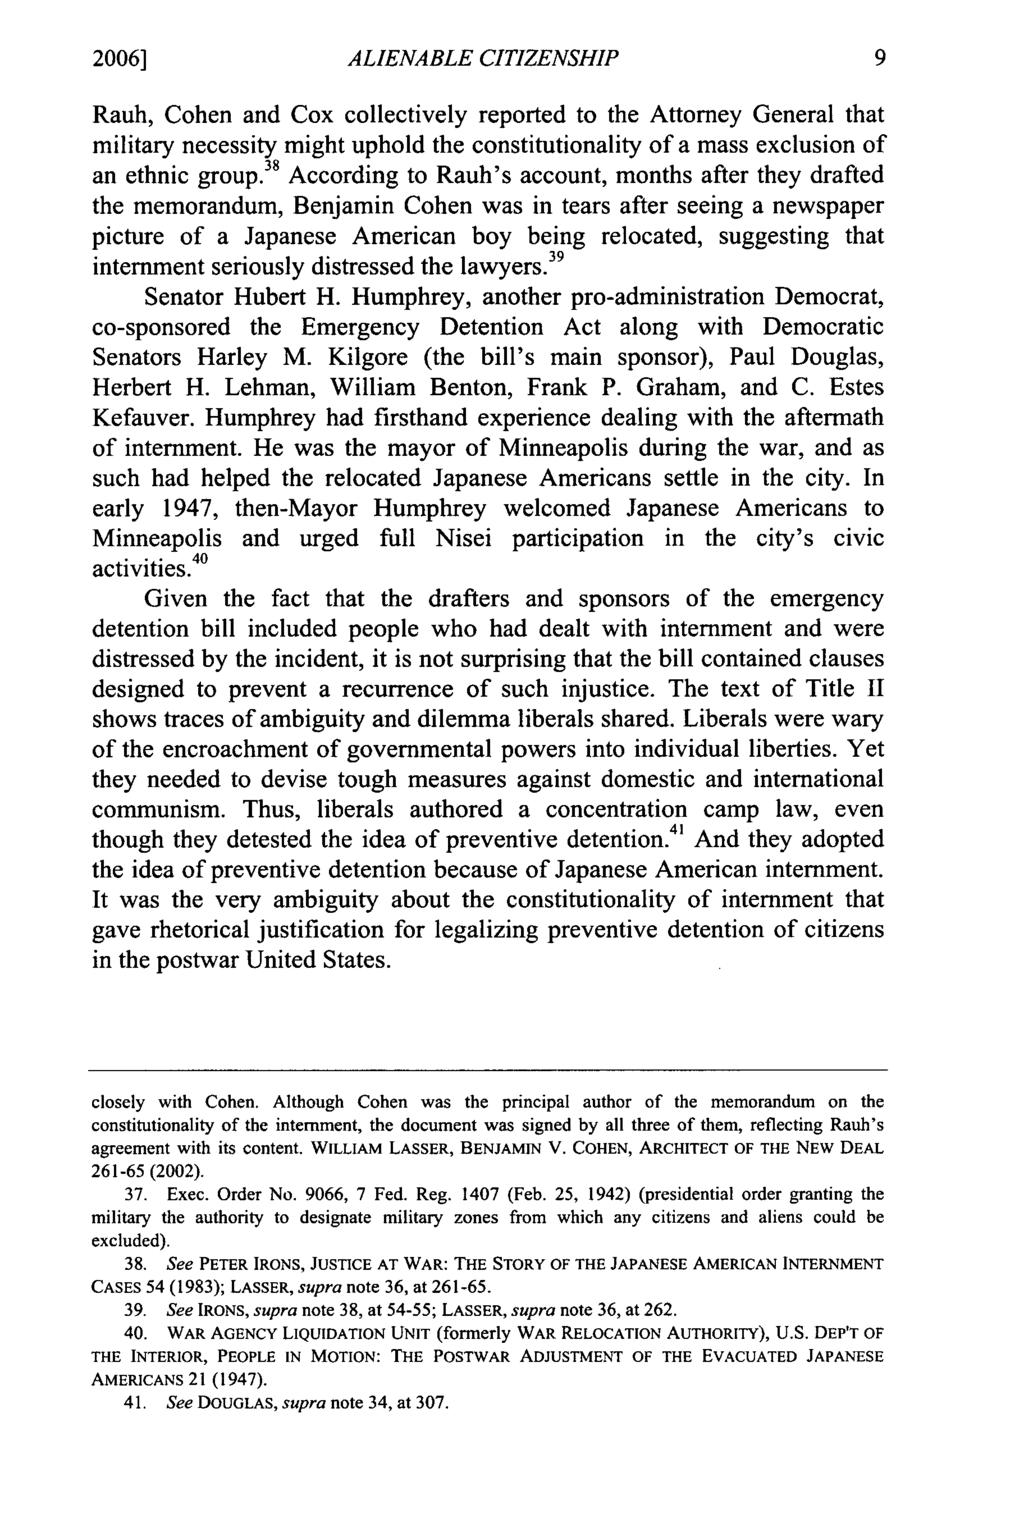 2006] ALIENABLE CITIZENSHIP Rauh, Cohen and Cox collectively reported to the Attorney General that military necessity might uphold the constitutionality of a mass exclusion of 38 an ethnic group.